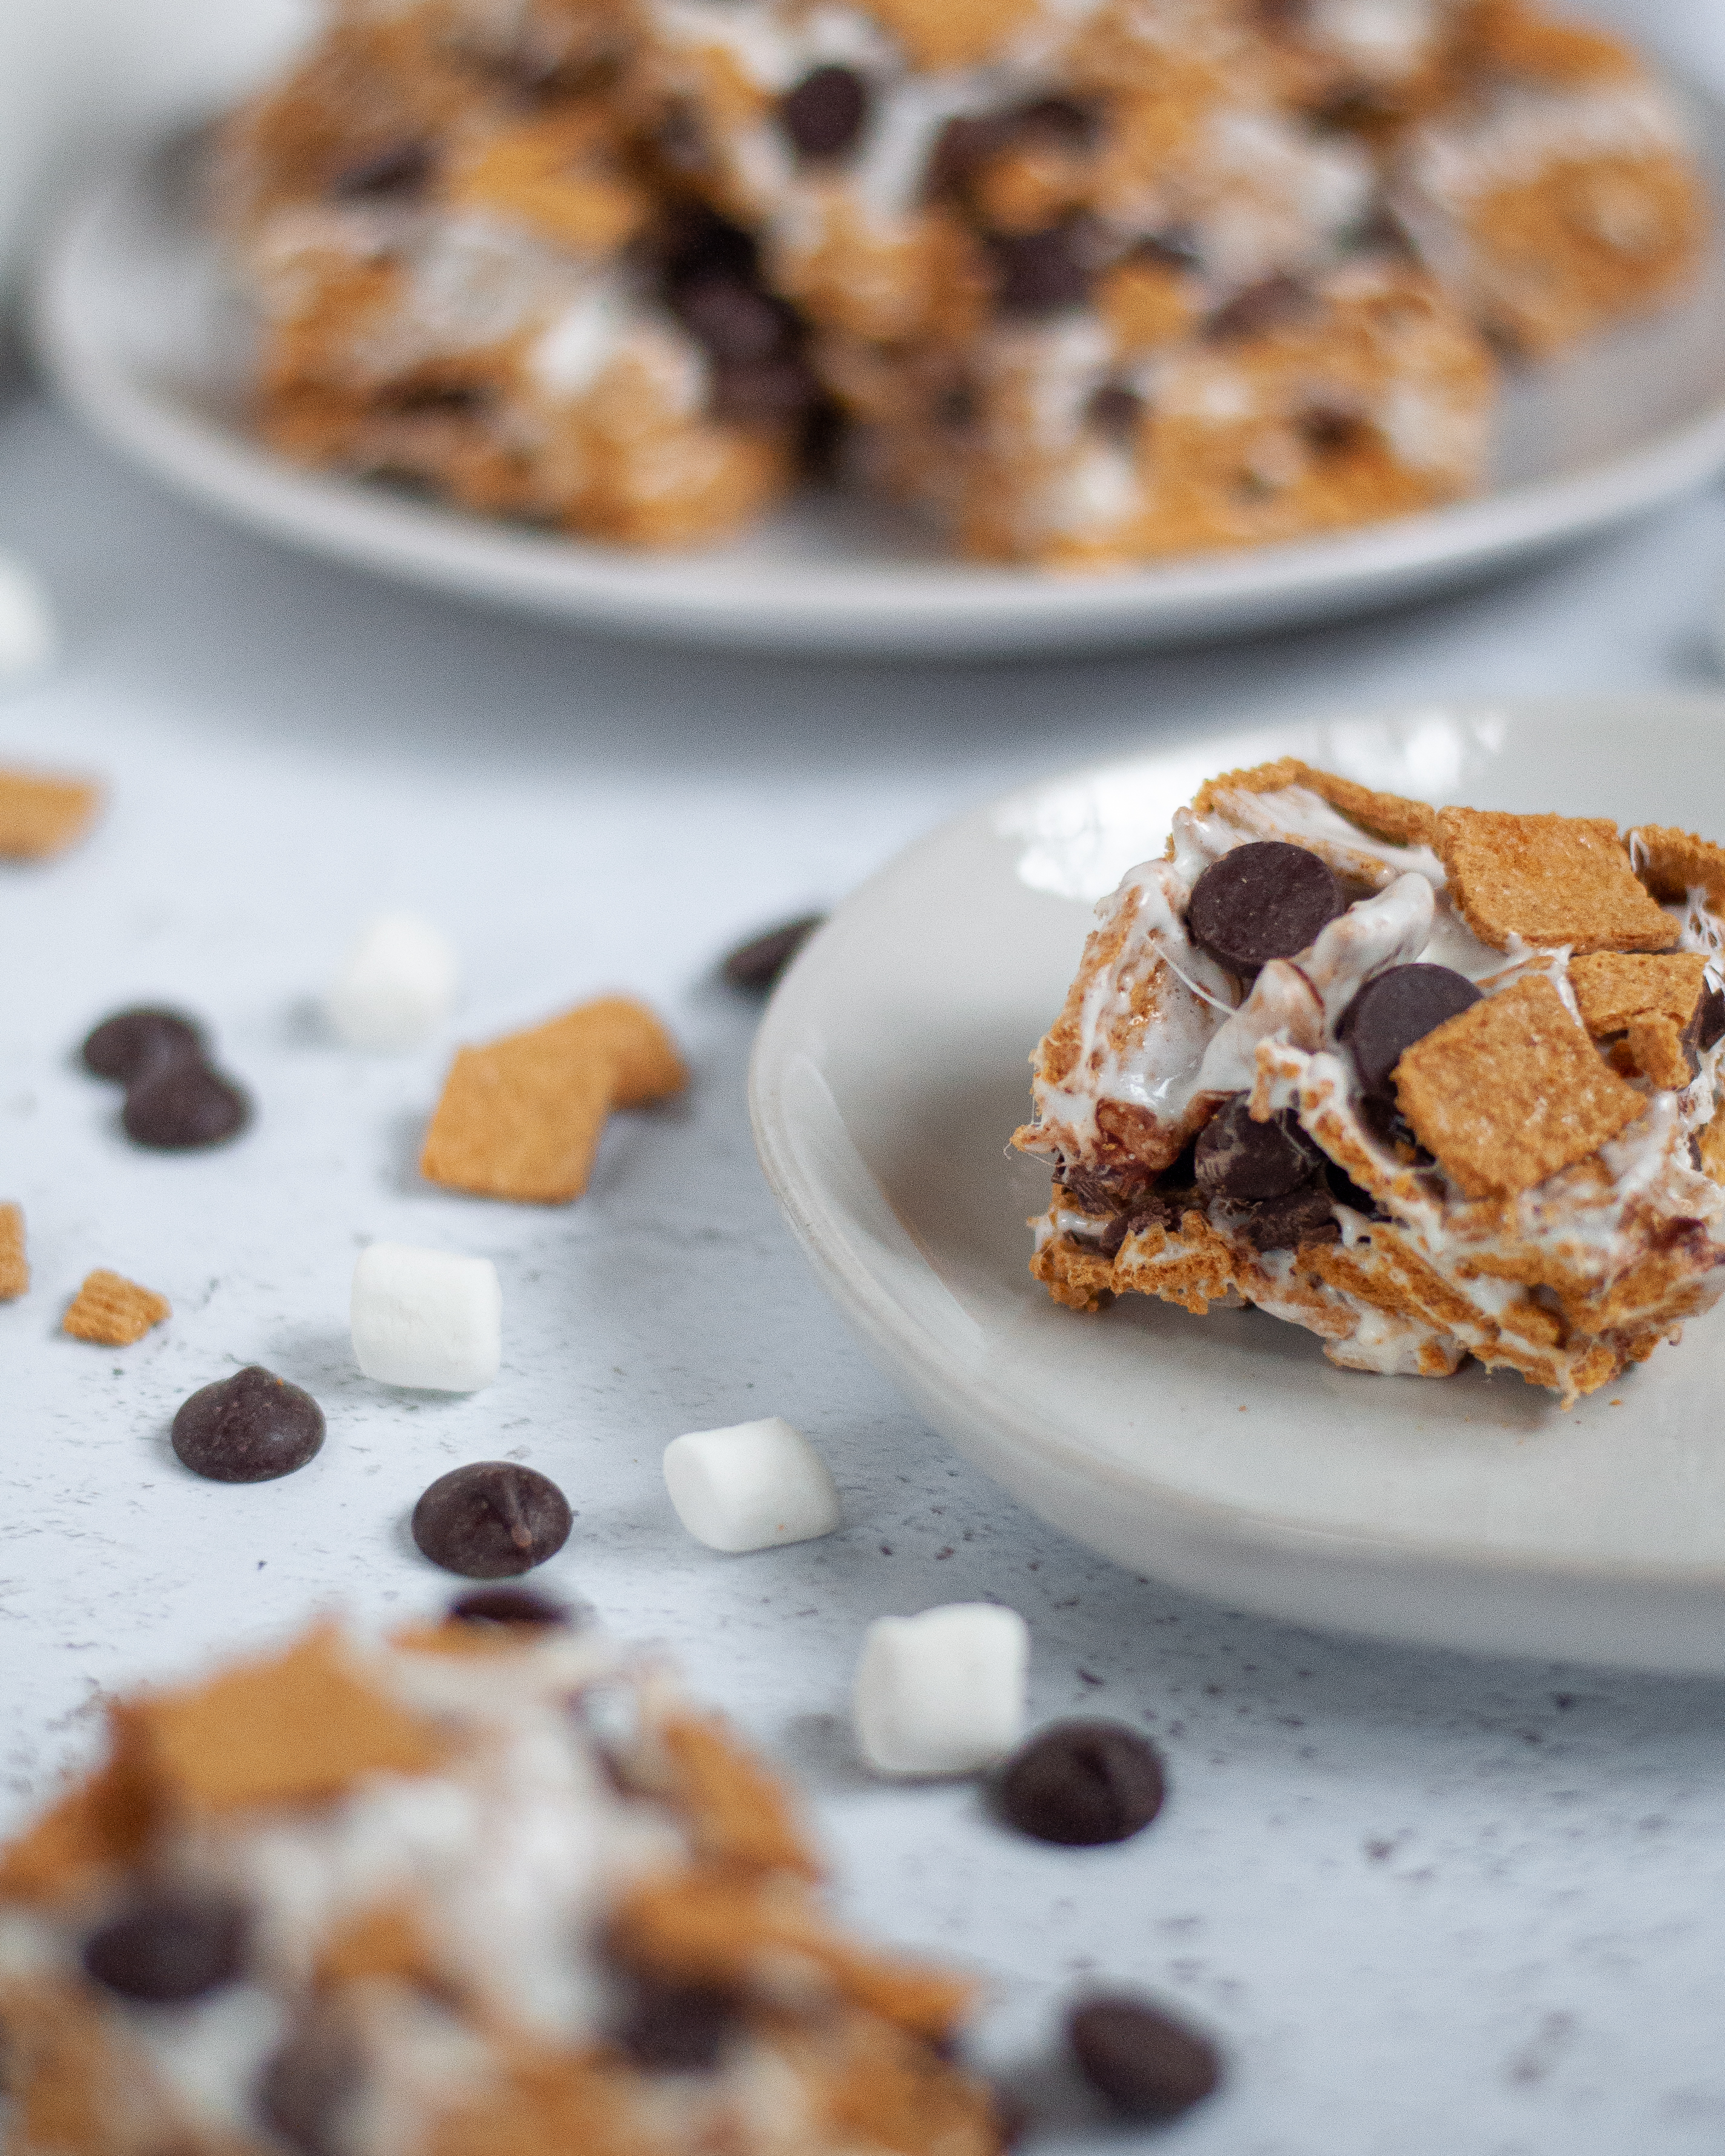 Focus on a plate with a smores bar at the center right. In the foreground there is another smores dessert bar blurred out, and in the background a platter for smores bars are also blurred. There are mini marshmallows, chocolate chips, and golden grahams scattered throughout the image as well.